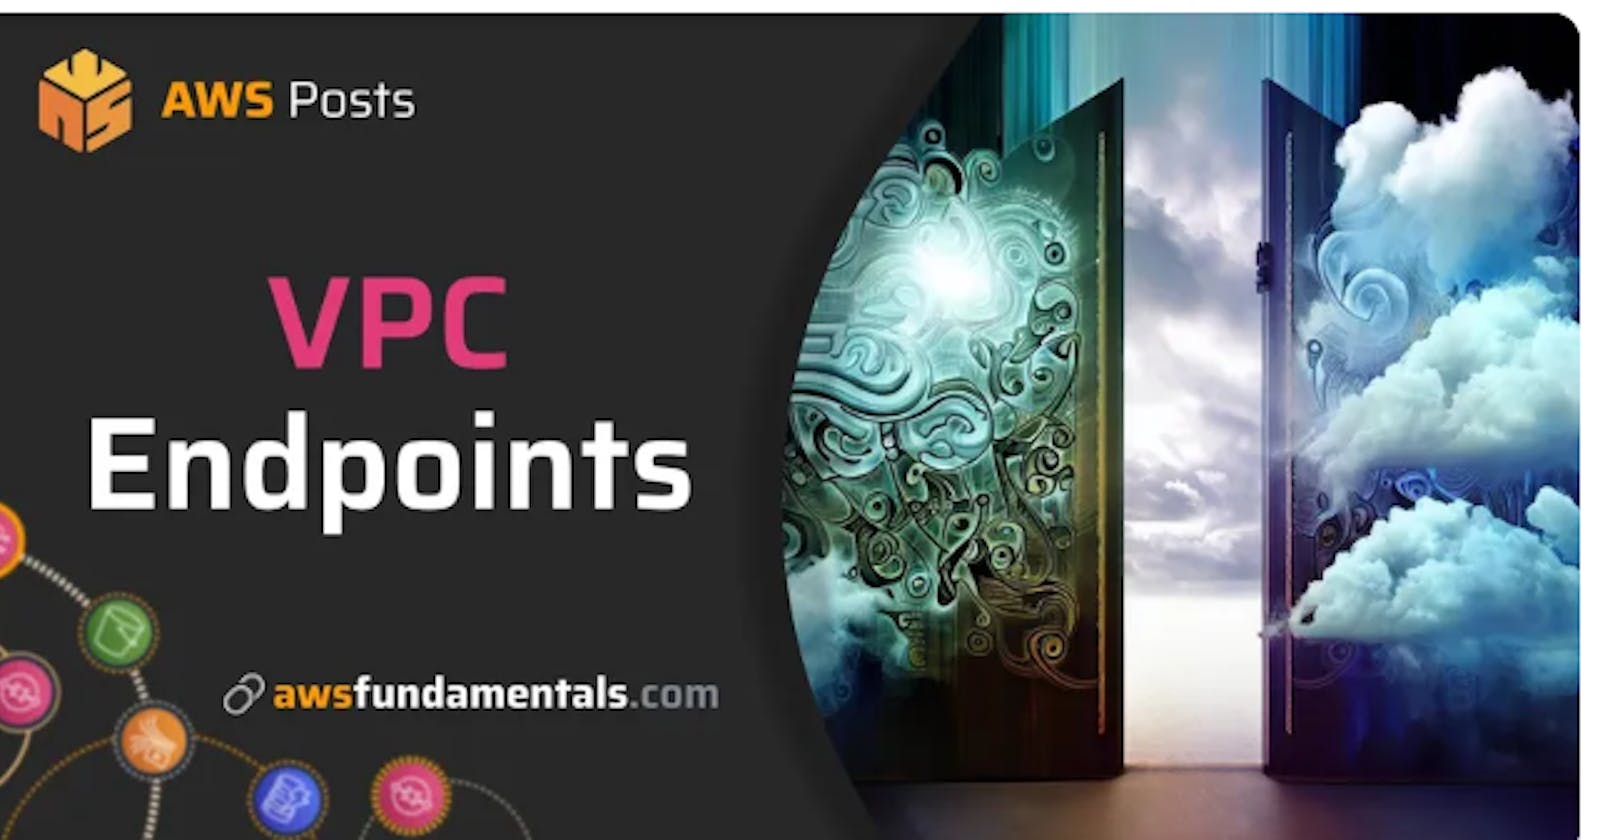 VPC Endpoints